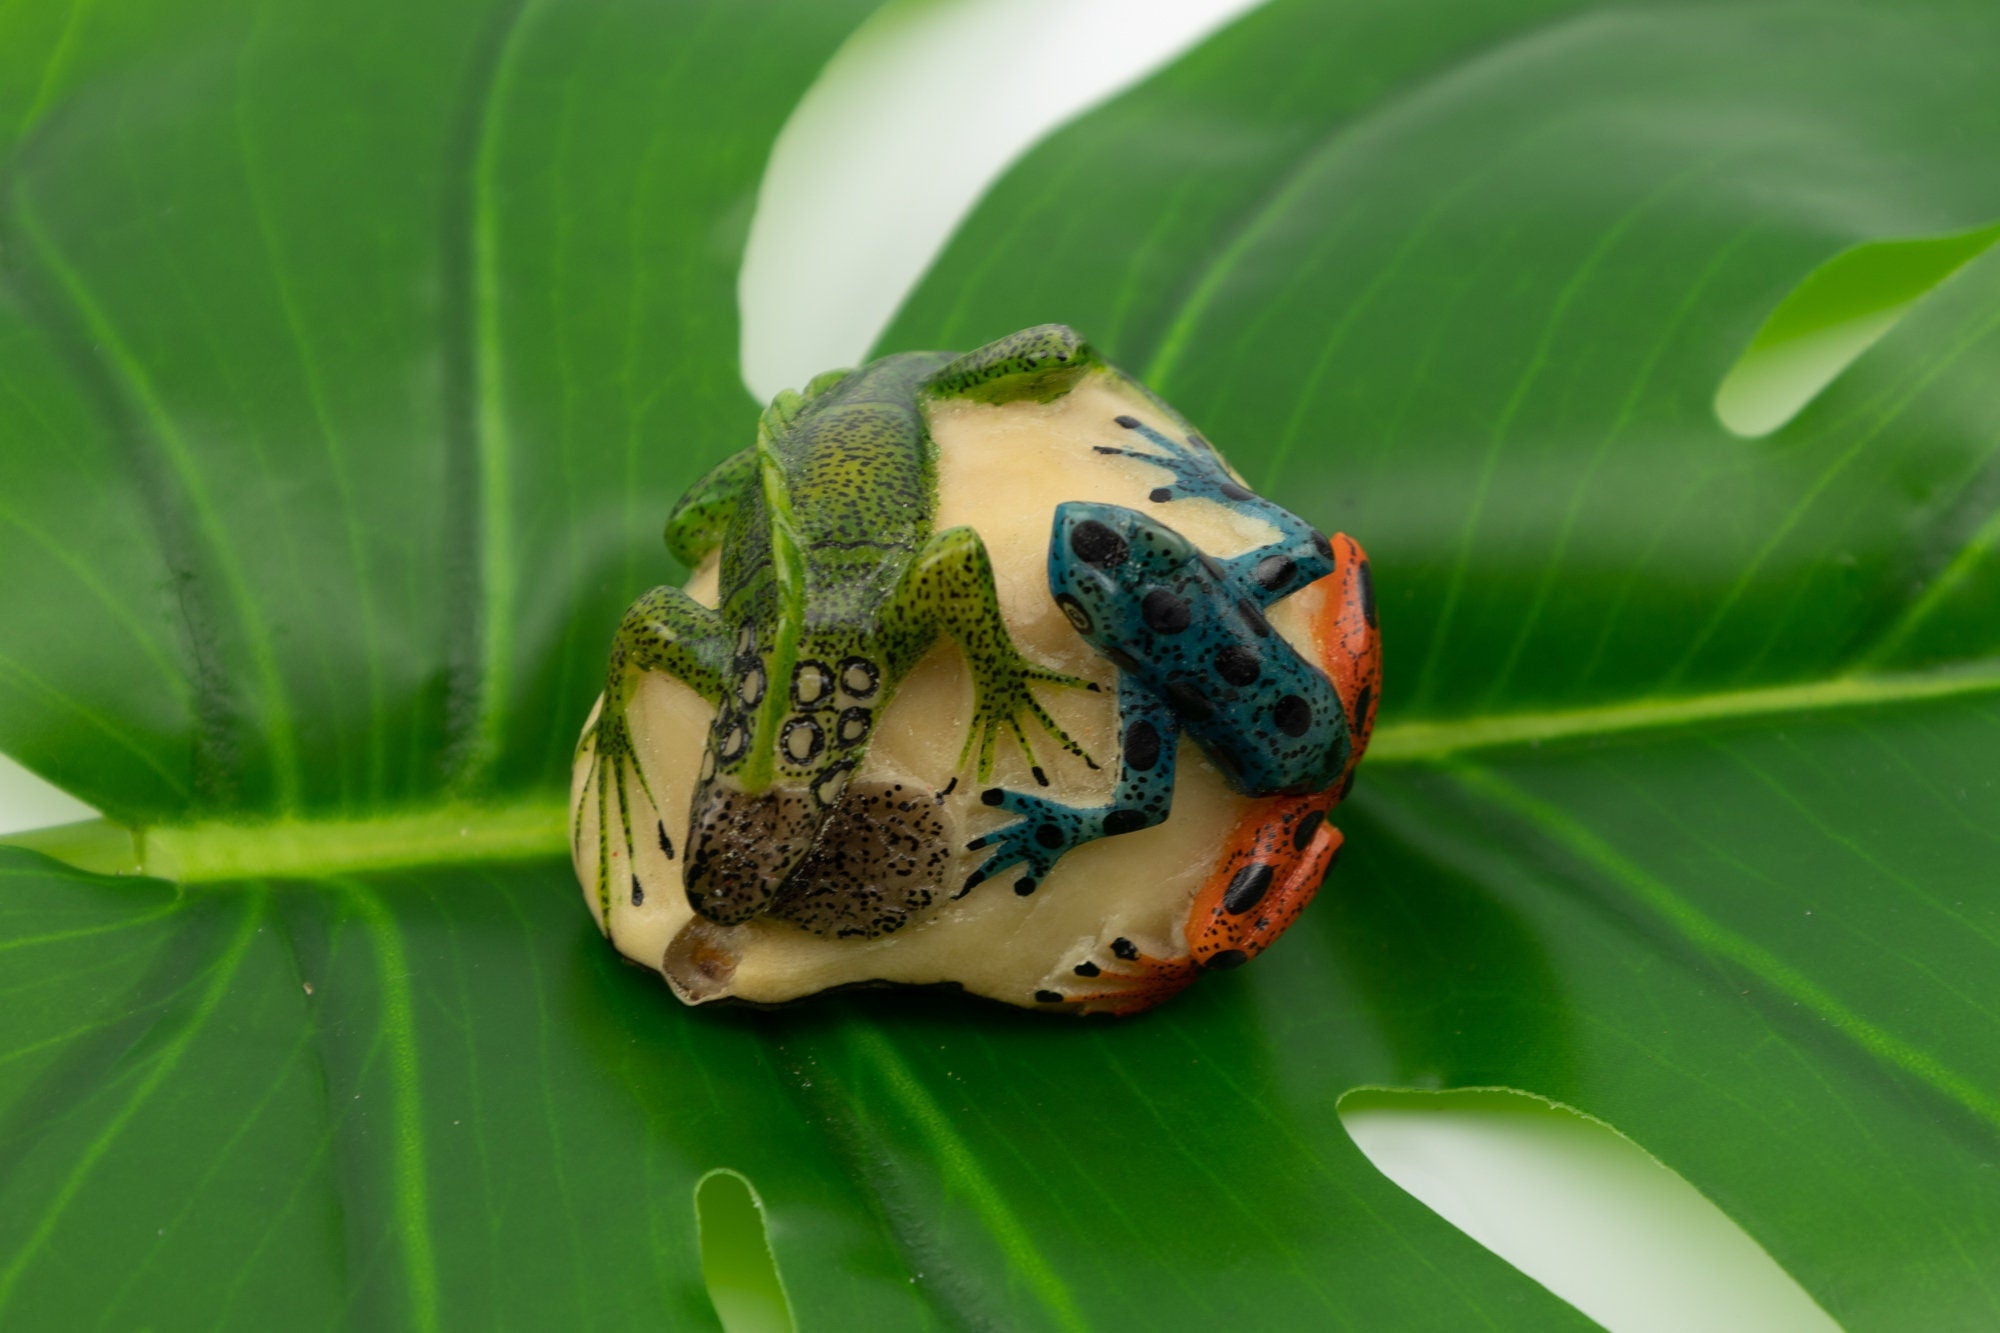 Vintage hand Carved Iguana Frog Tagua Nut Made By Wounaan And Emberá Panama Indians. Animal Statue, Carving Miniature, Figurine, Decoration